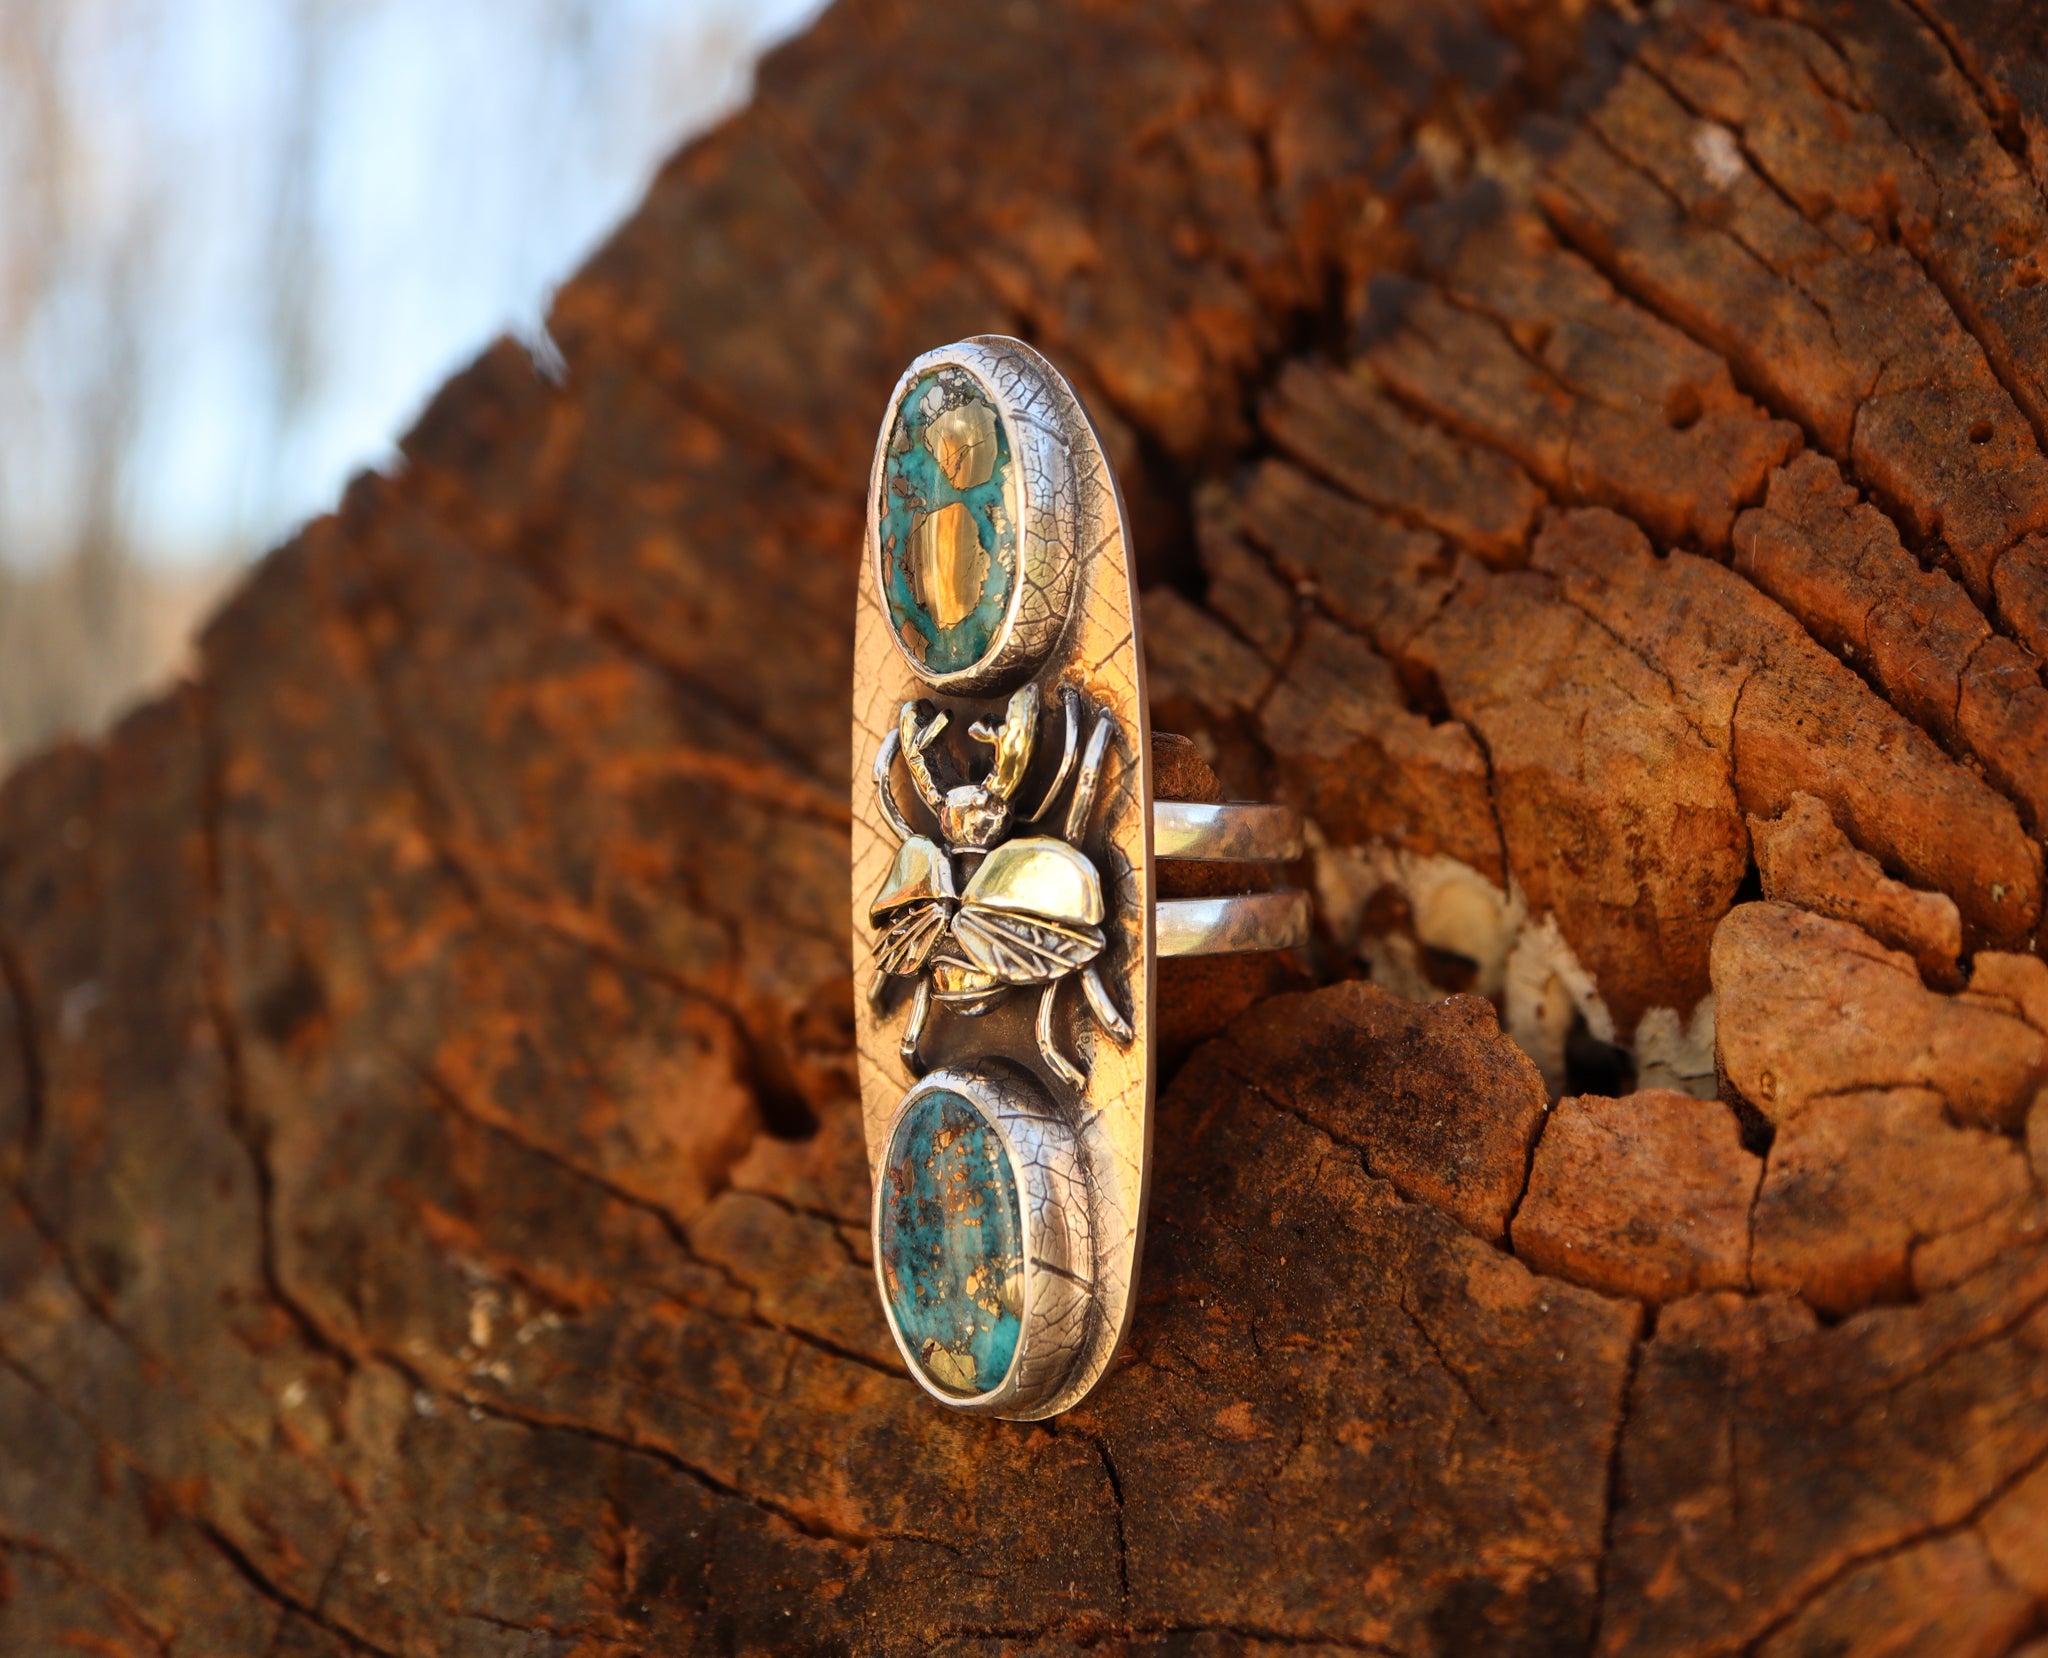 A side view of the silver and gold stag beetle ring. It shows the double ring band and the leaf patterned bezels holding the morenci turquoise stones. 